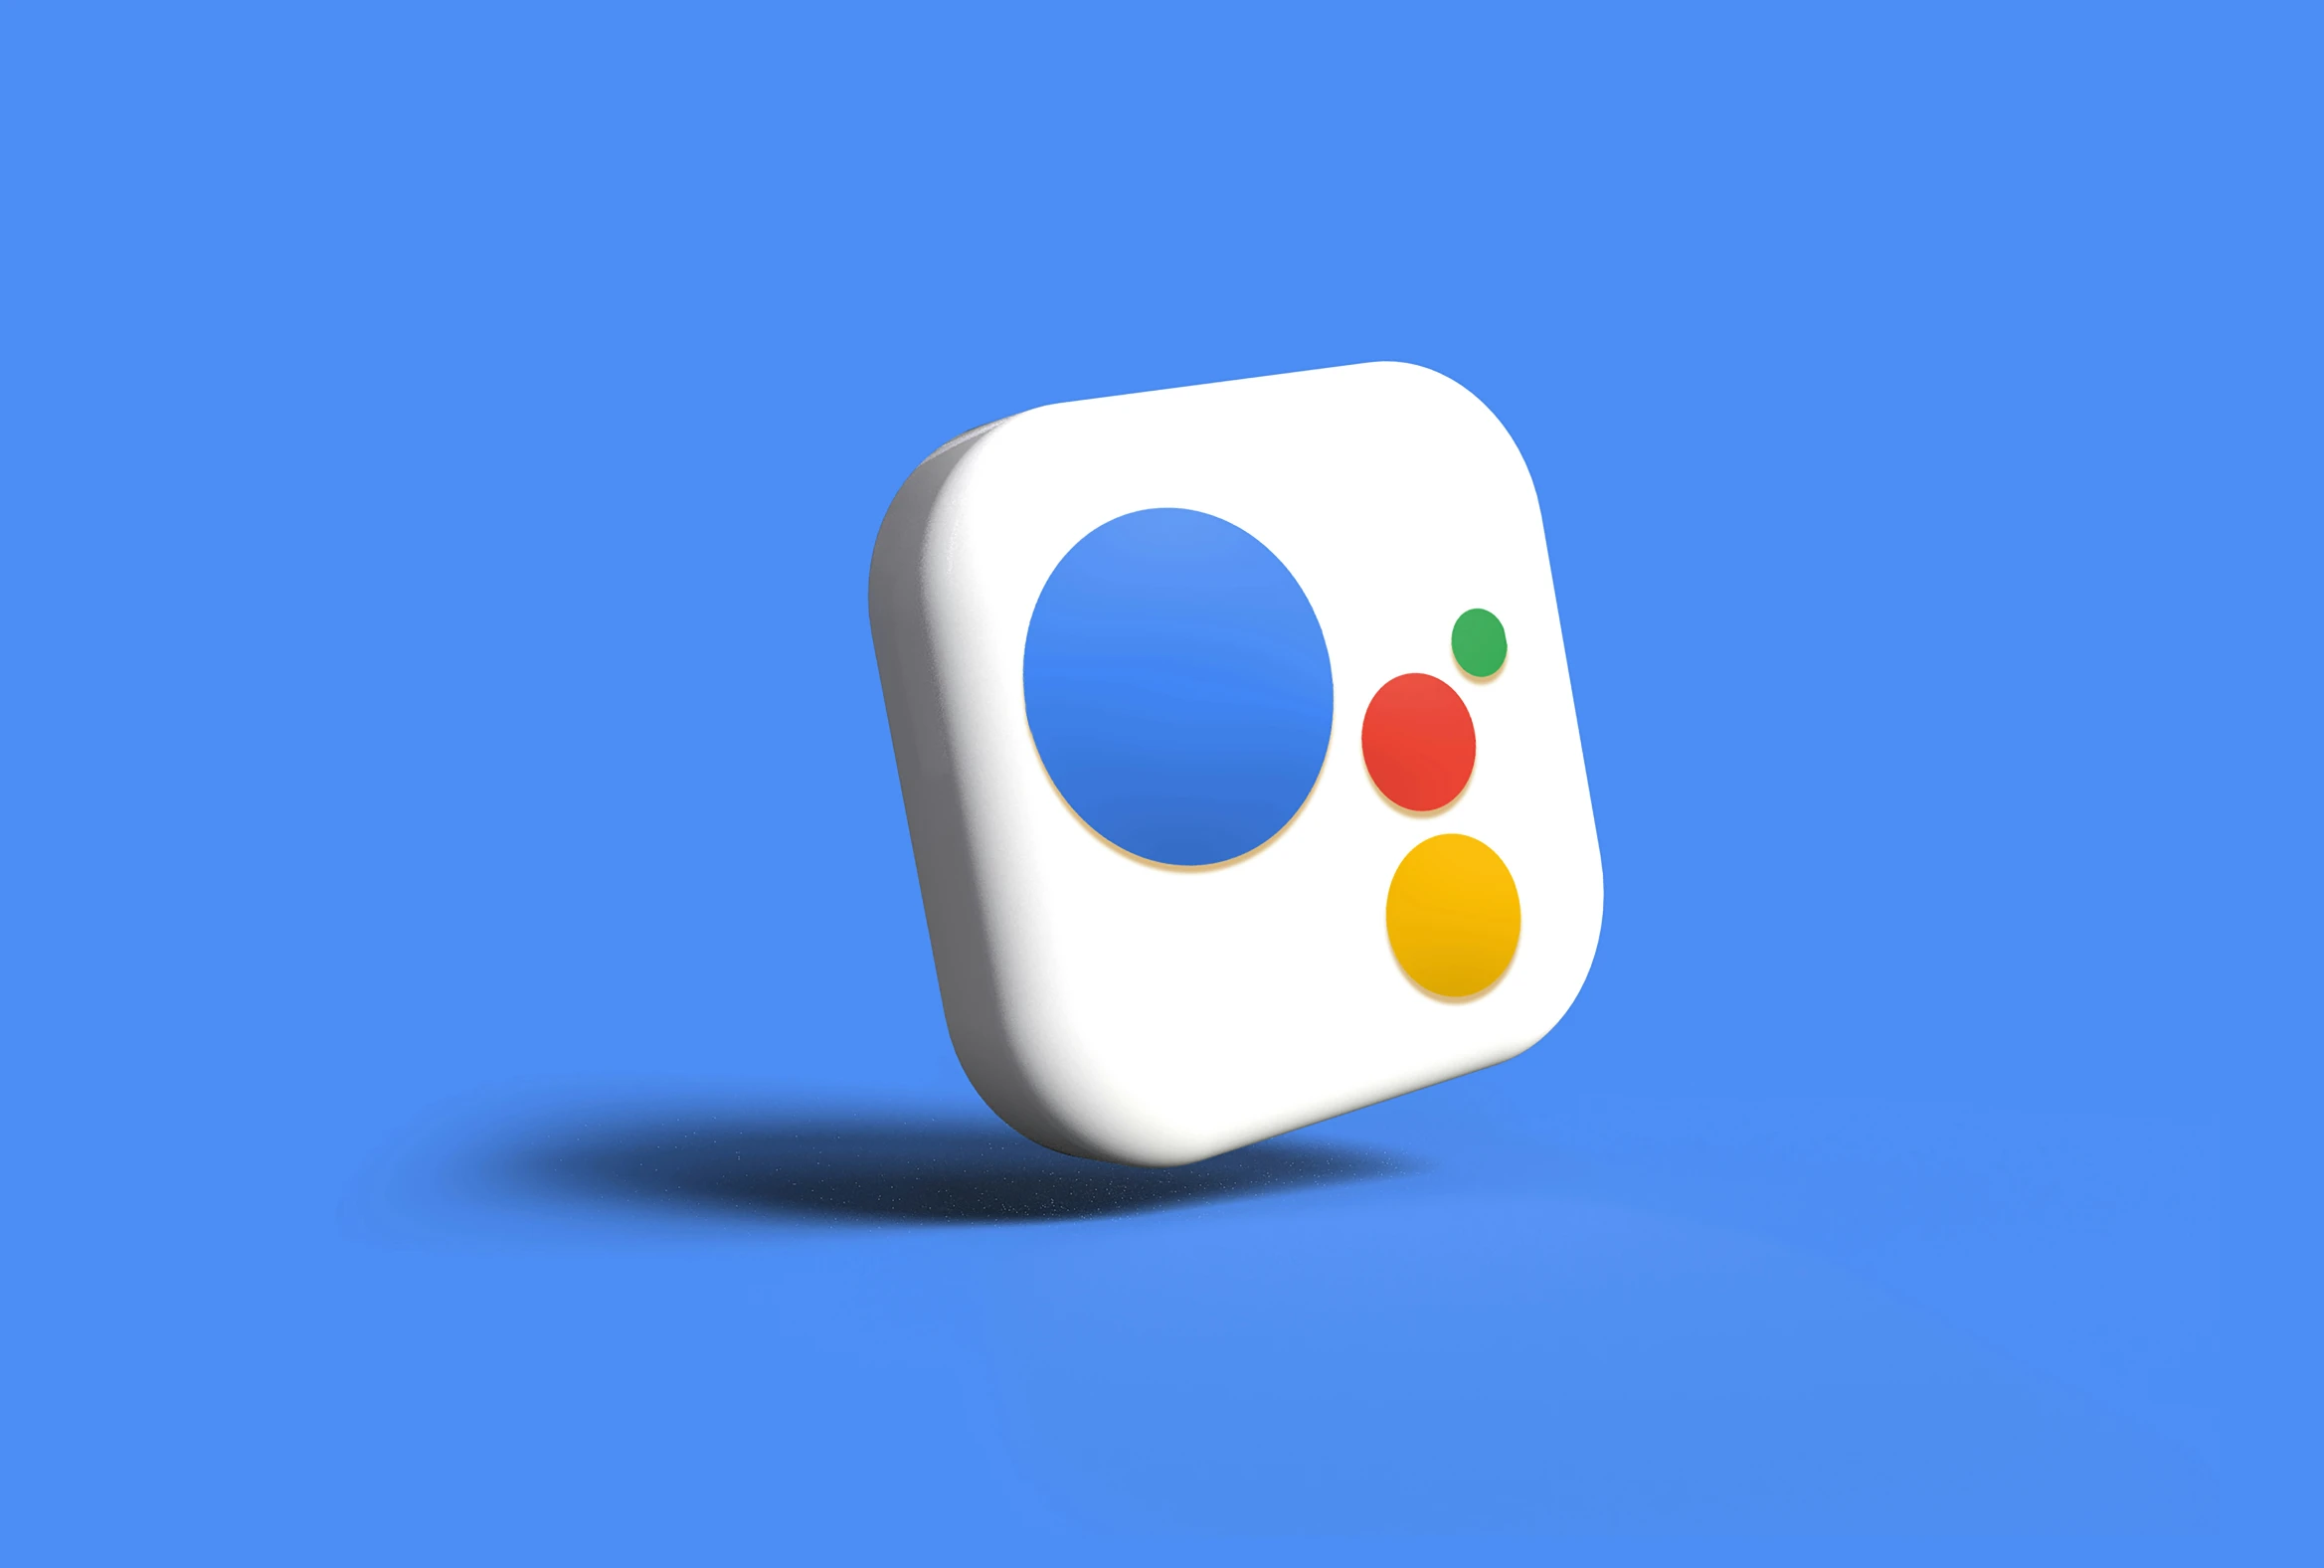 a white square shaped object with colored dots